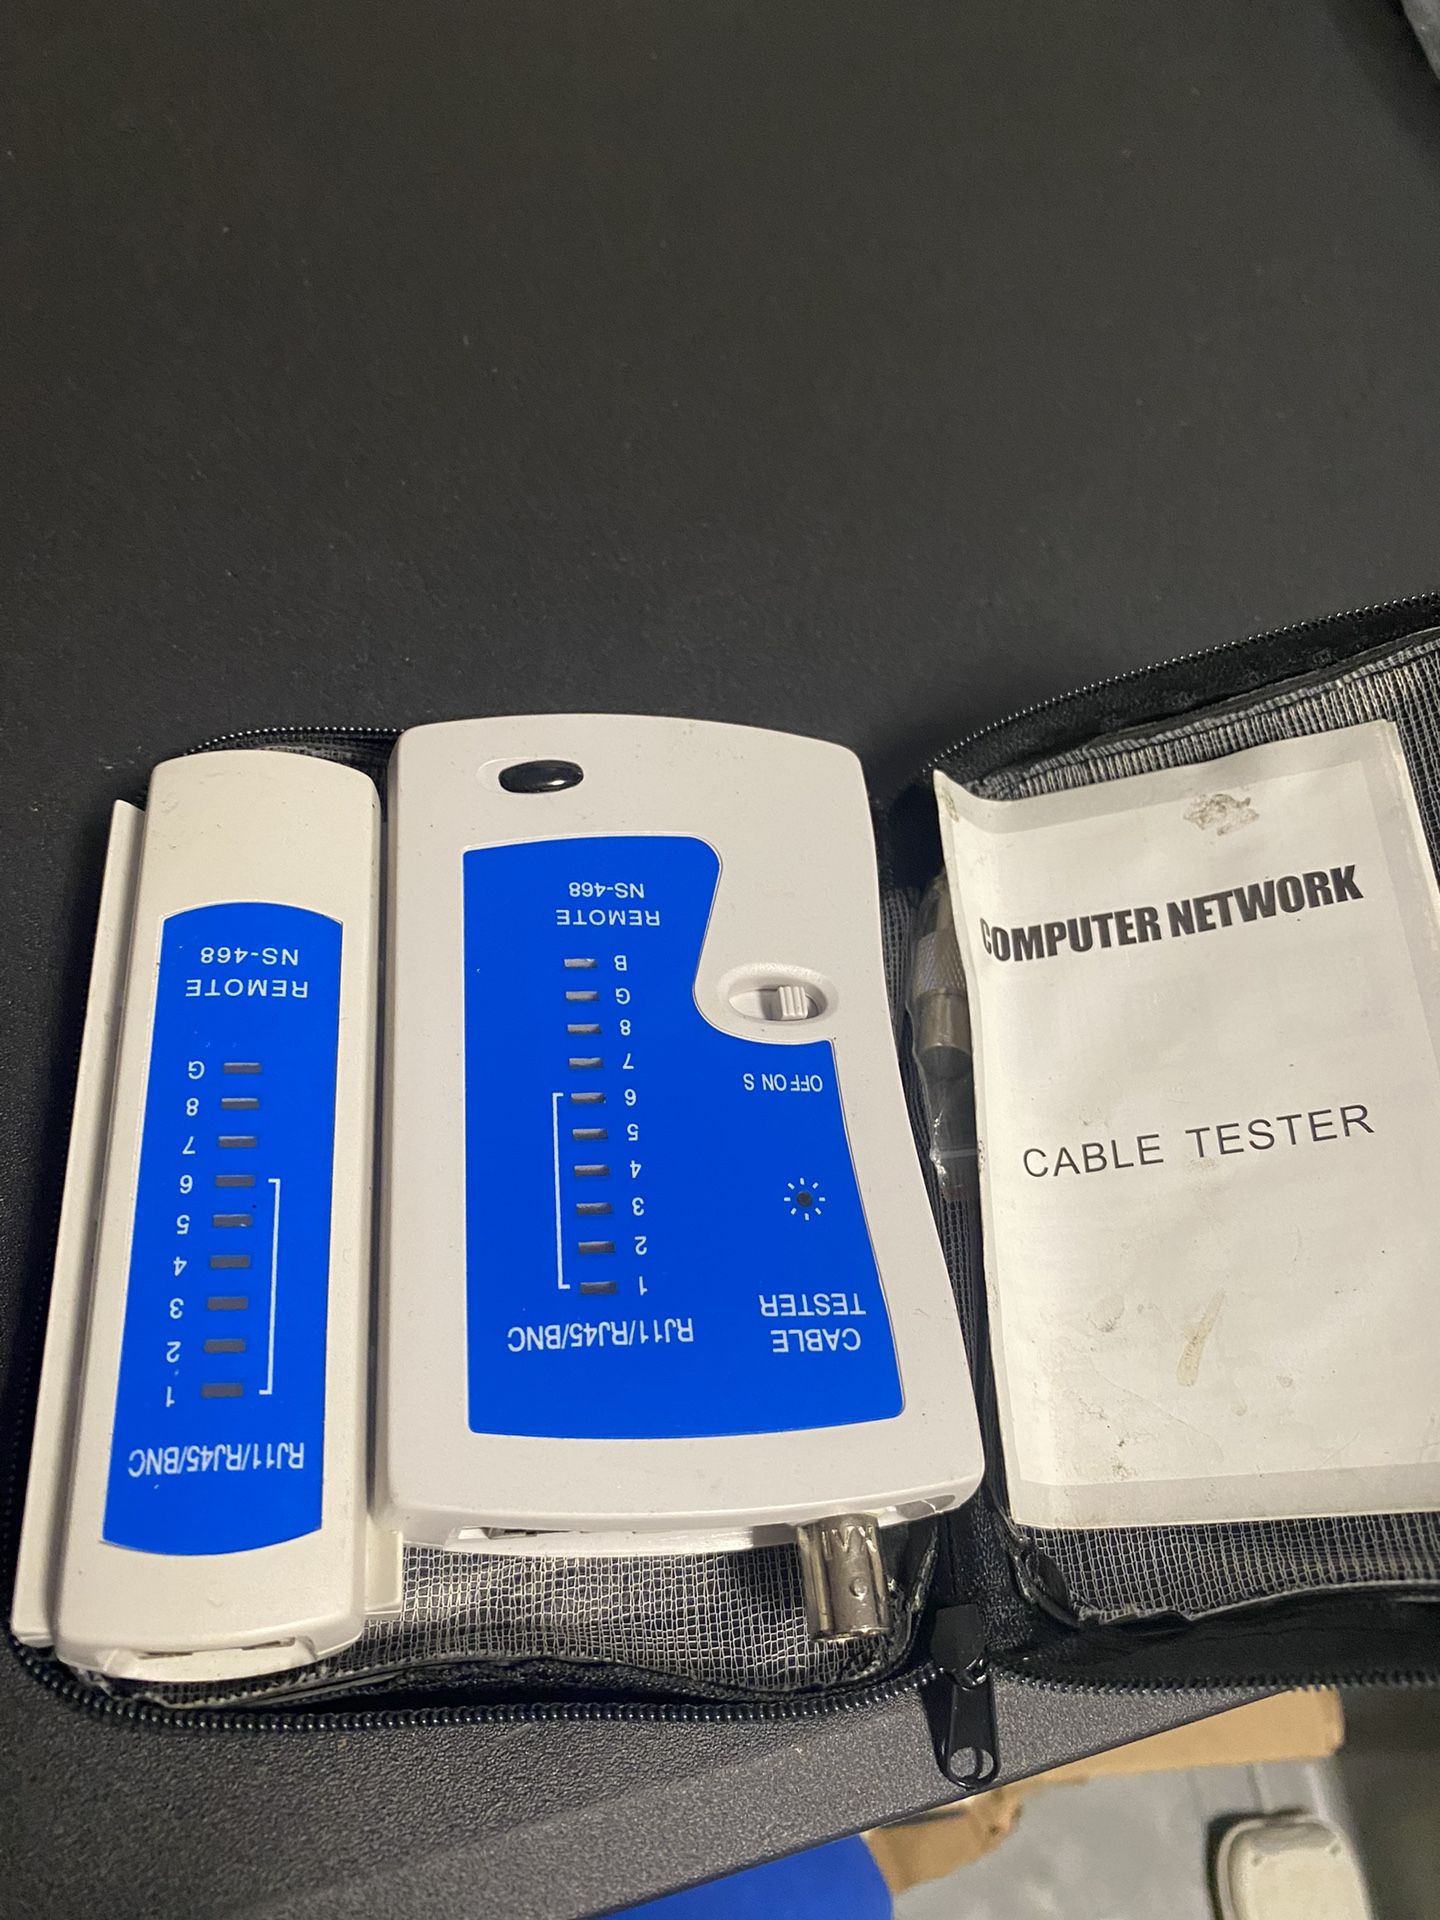 COMPUTER NETWORK CABLE TESTER